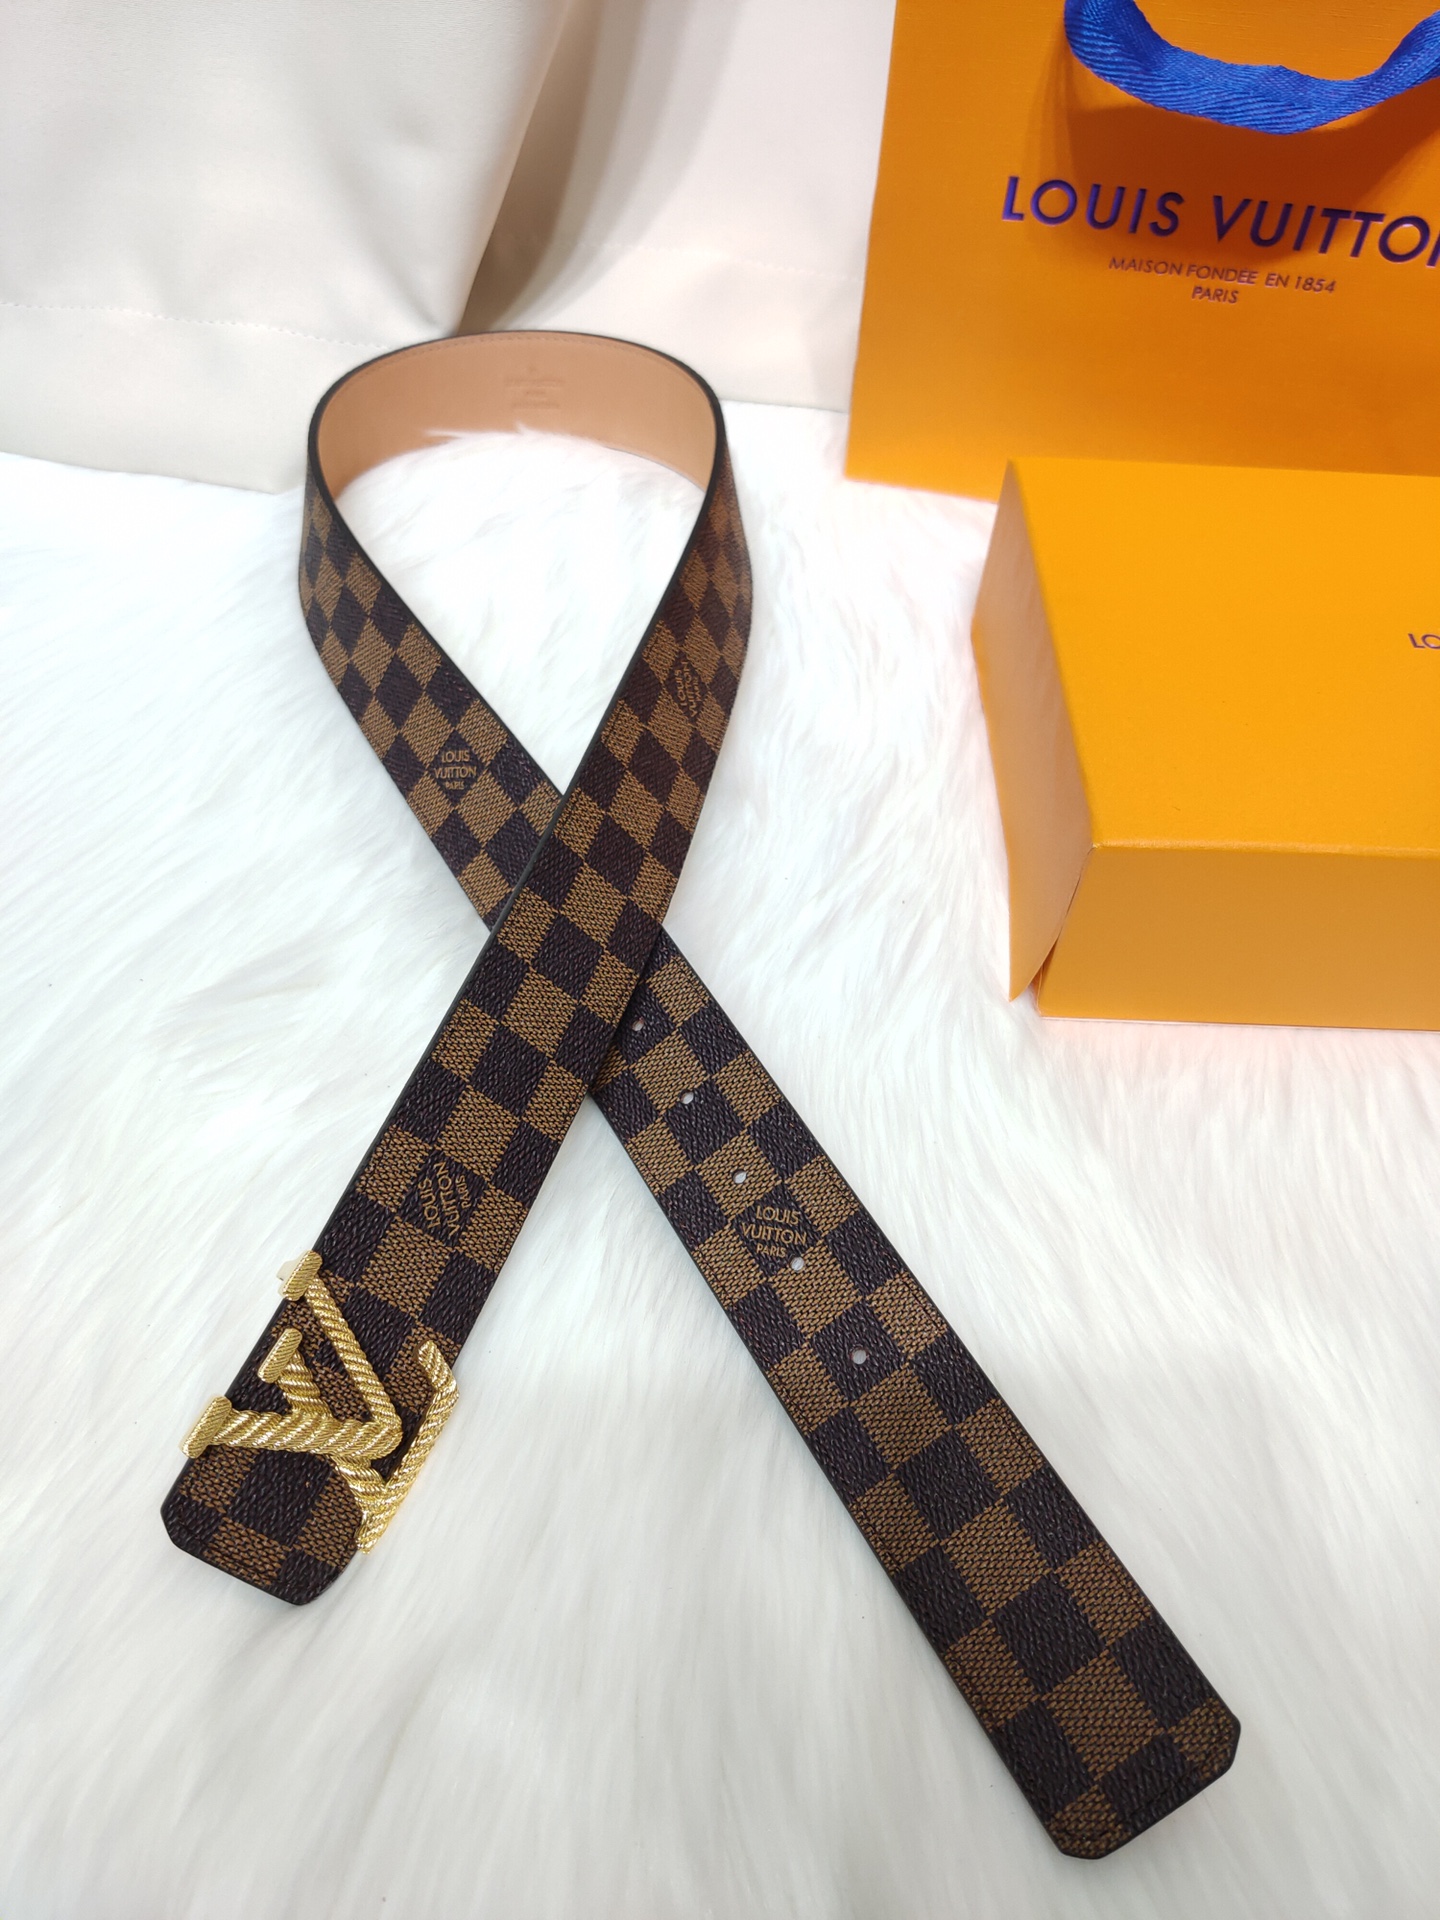 LV Aerogram 35mm Belt Other Leathers - Accessories